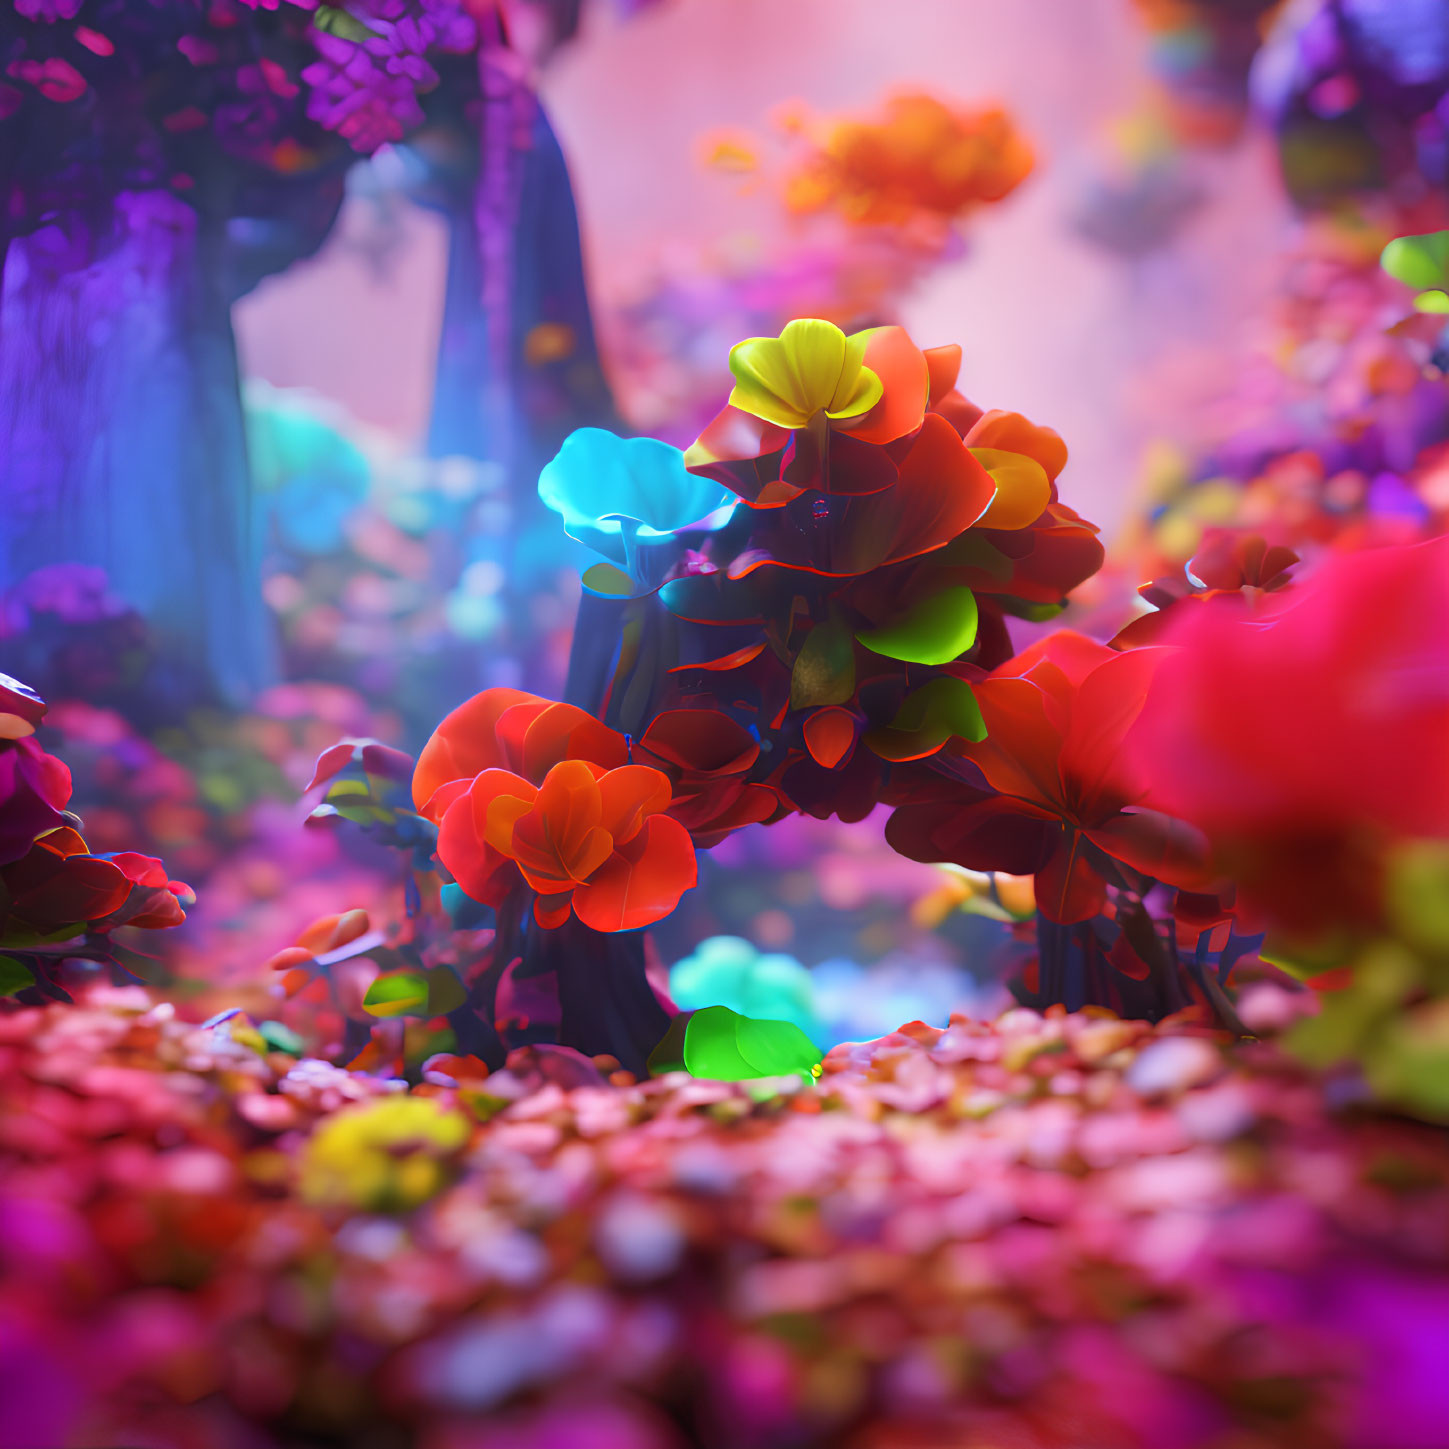 Fantasy forest with luminescent foliage and colorful petals